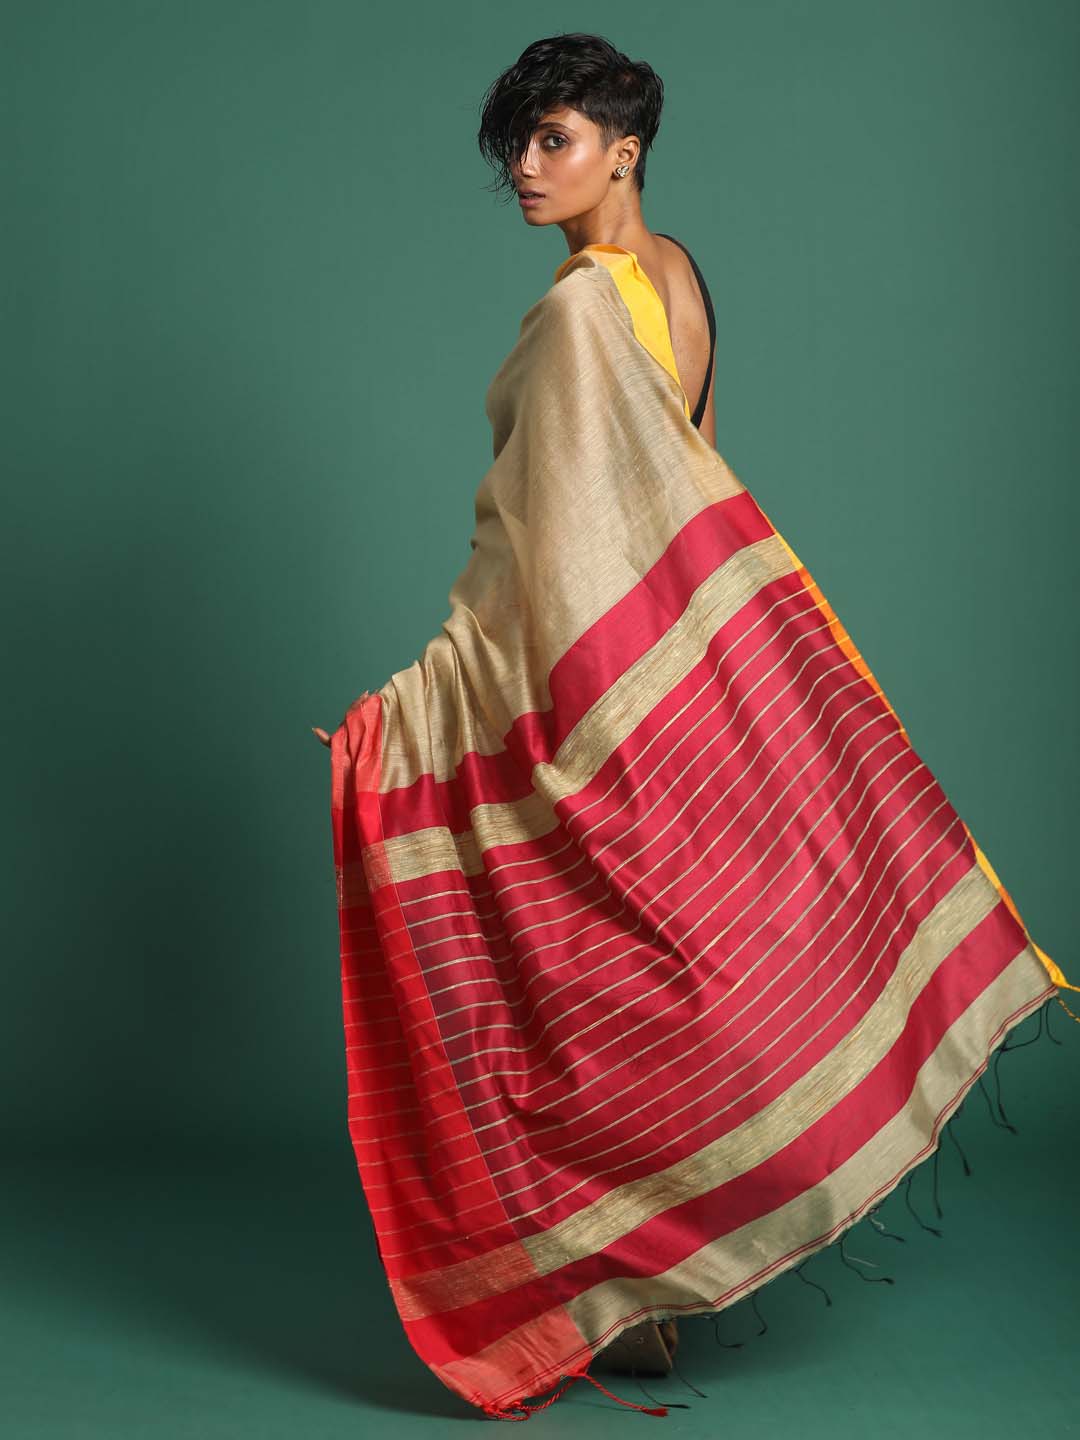 Indethnic Beige and Black Solid Colour Blocked Saree - View 3